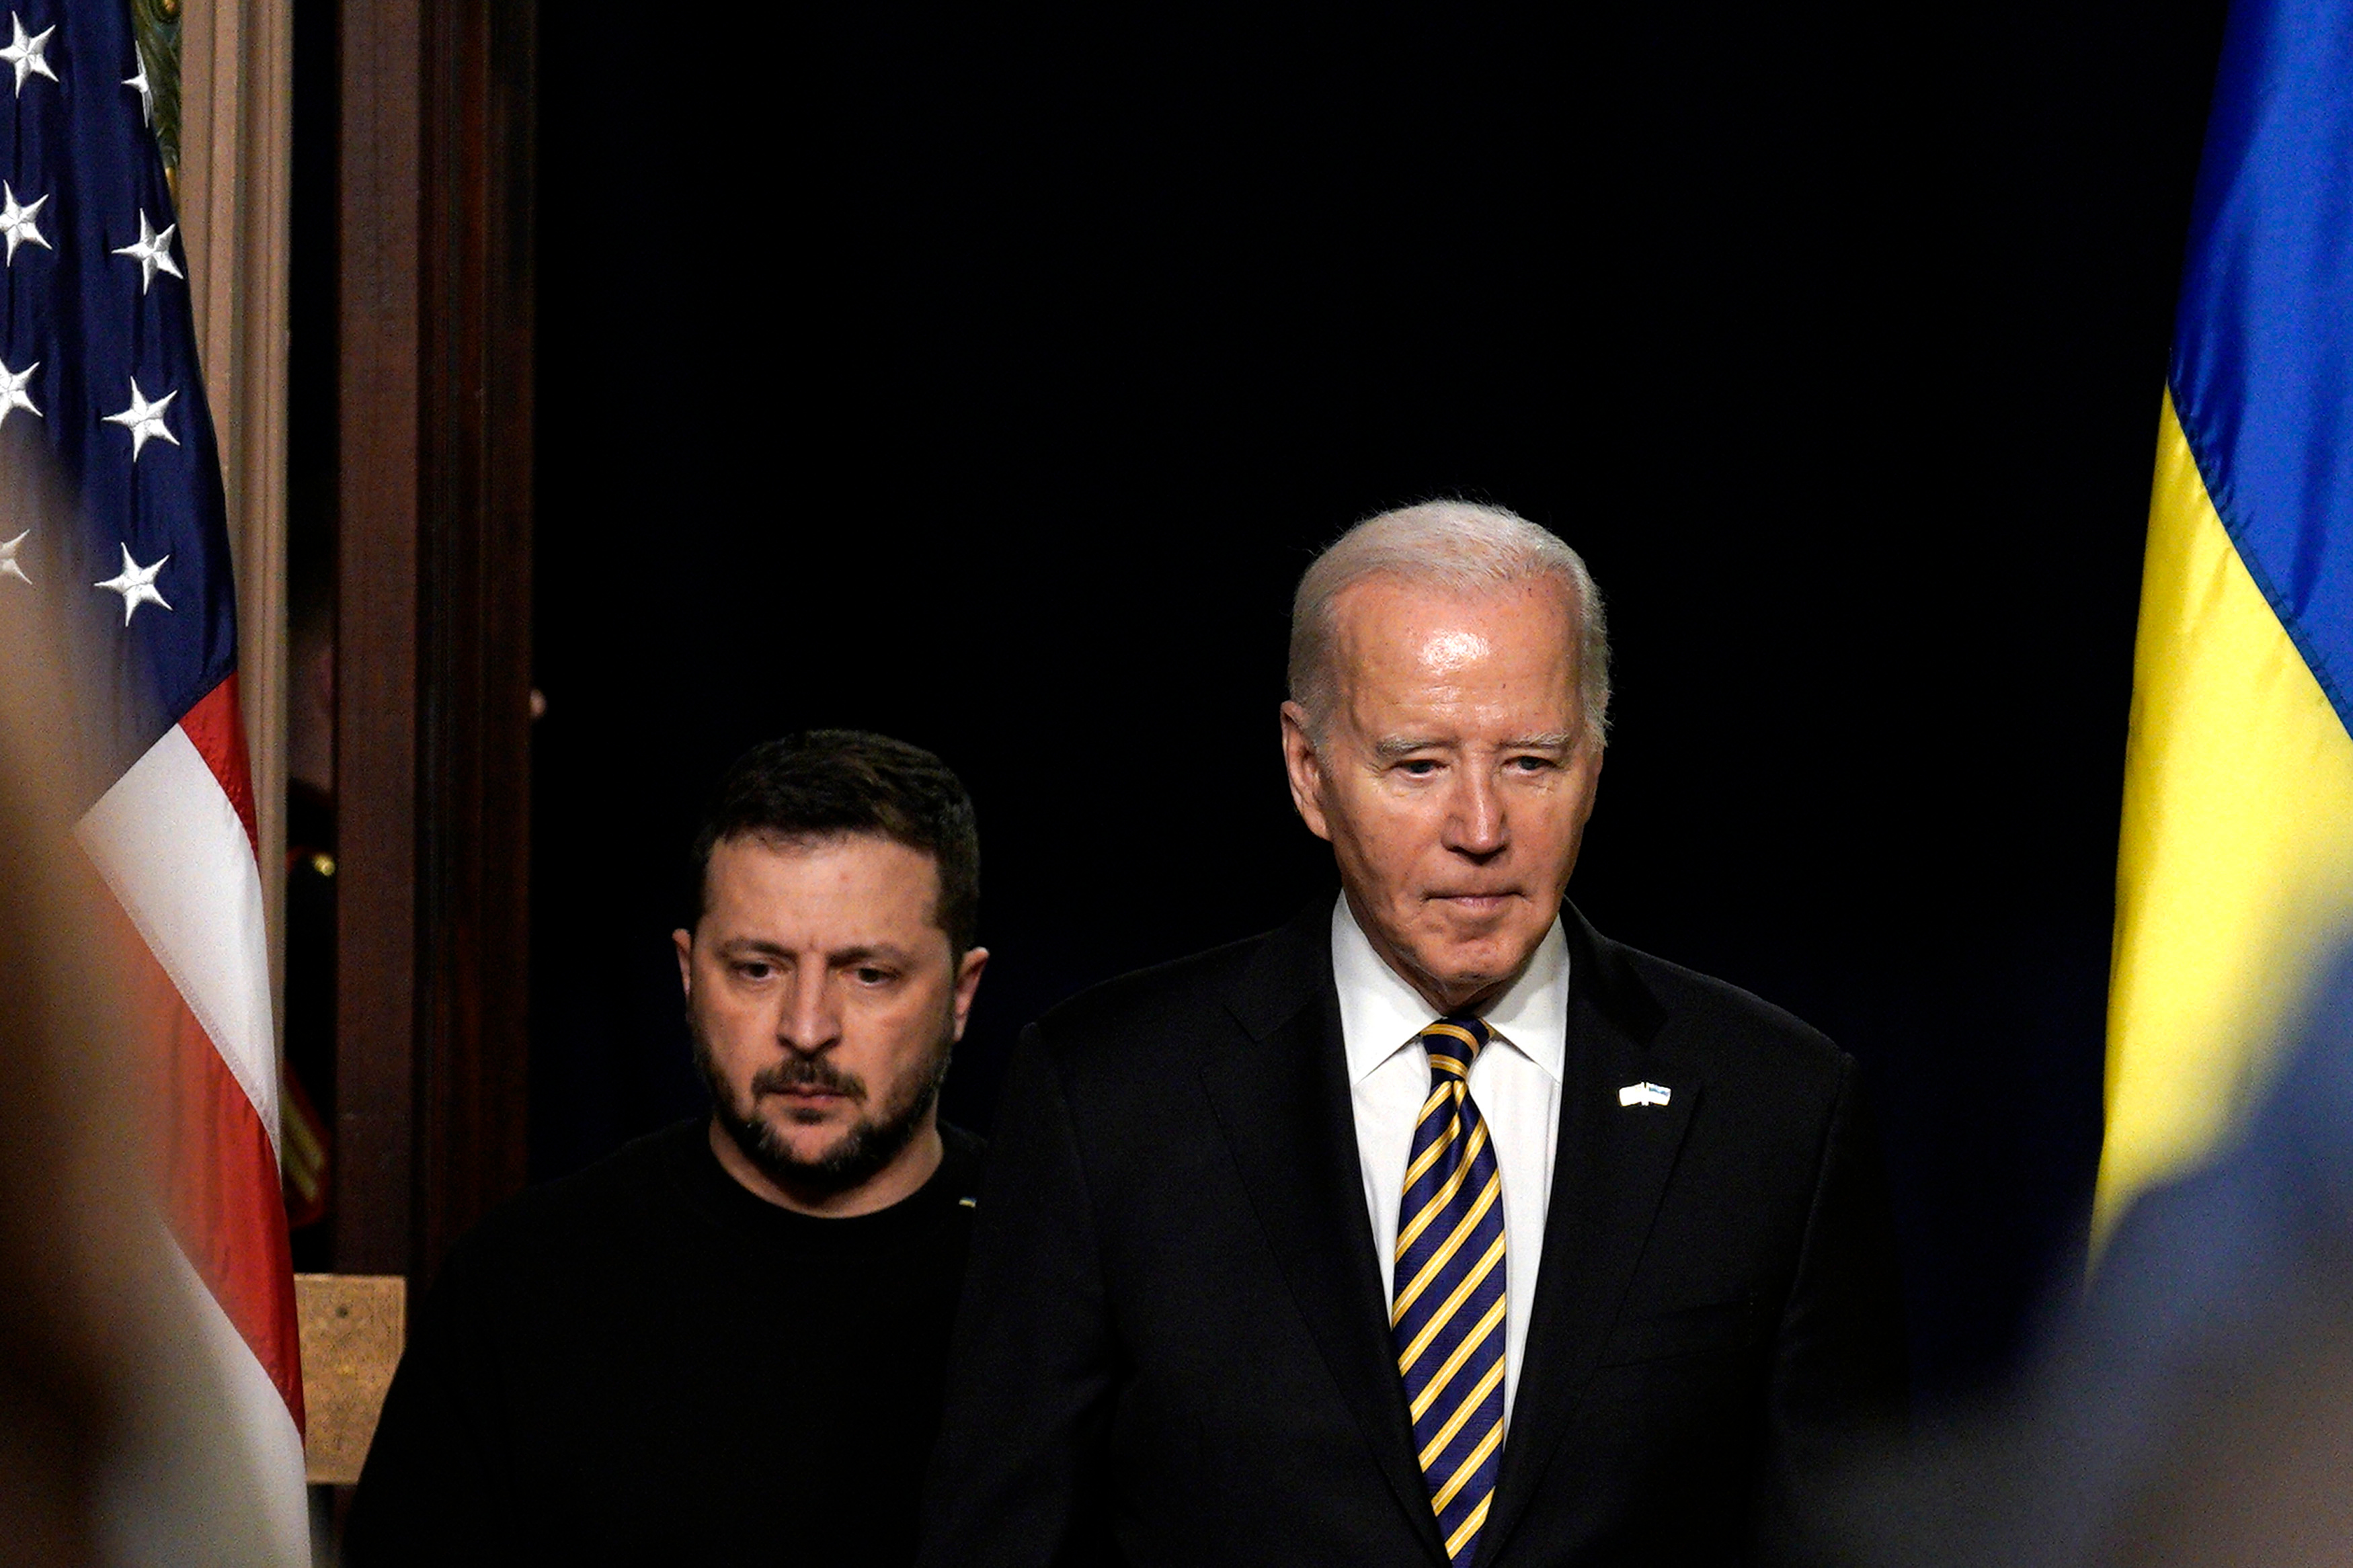 Biden and Zelensky enter a room, with the US and Ukraine flags on either side of them.